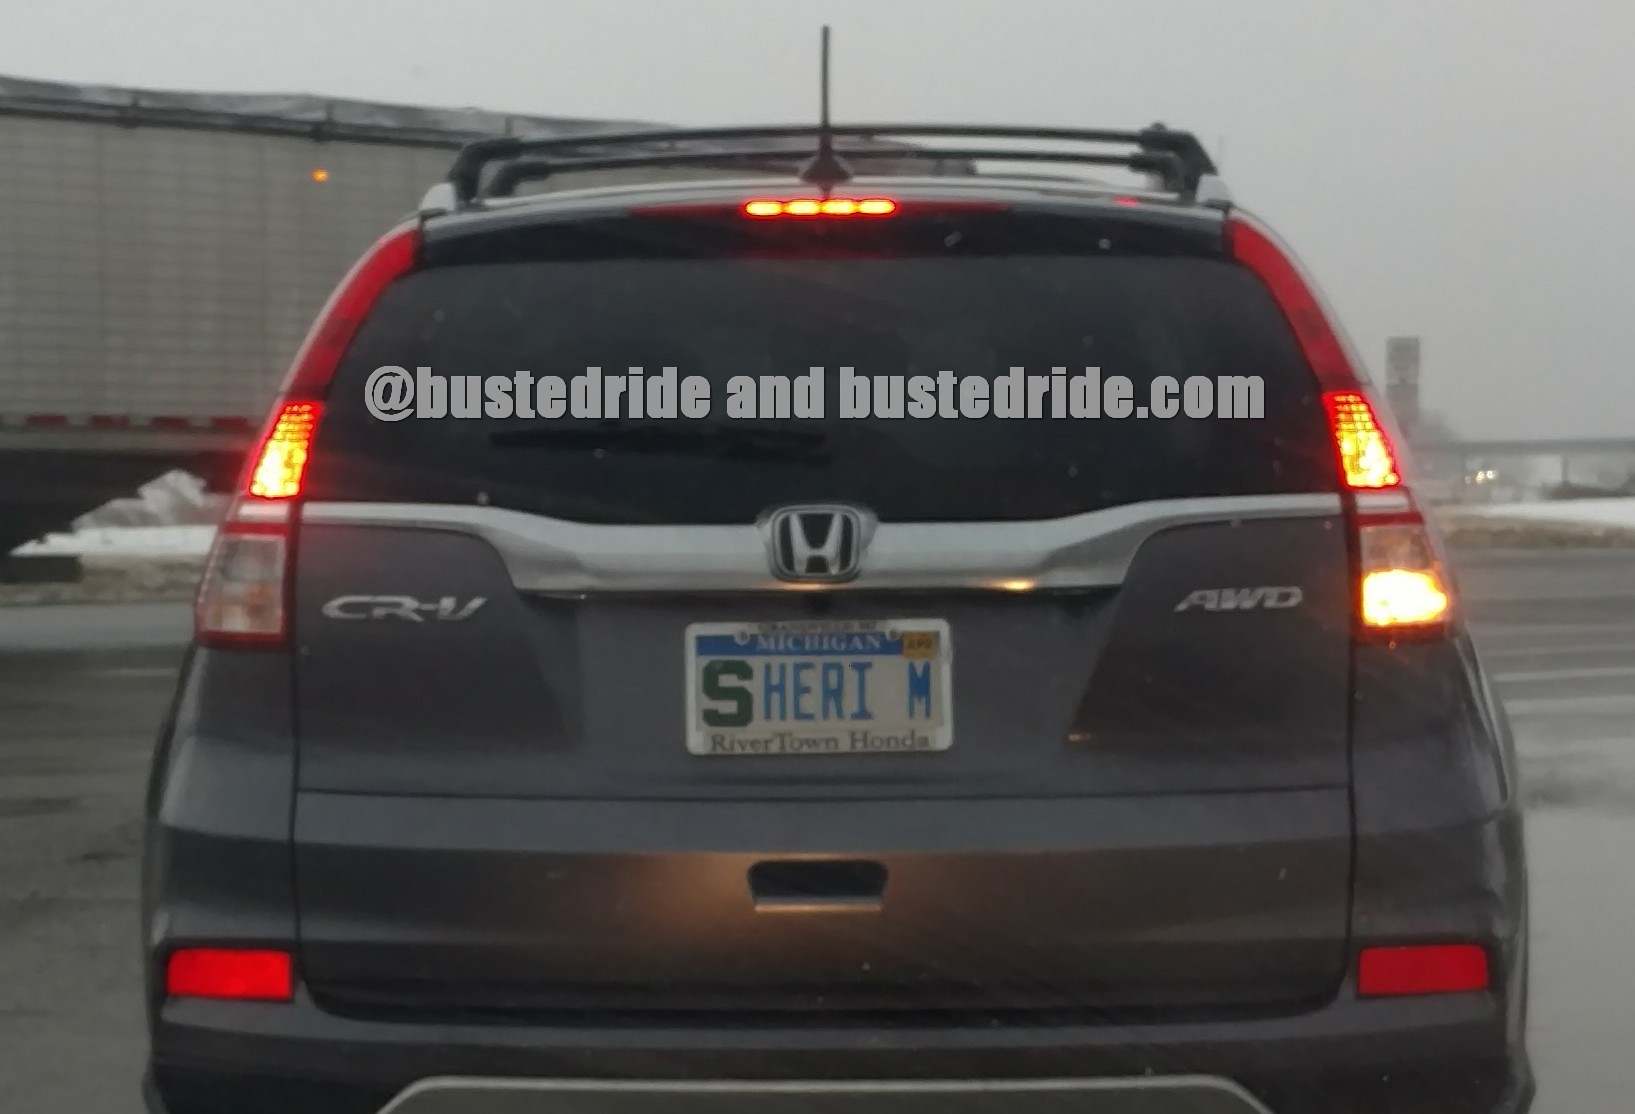 (S)HERI M - Vanity License Plate by Busted Ride